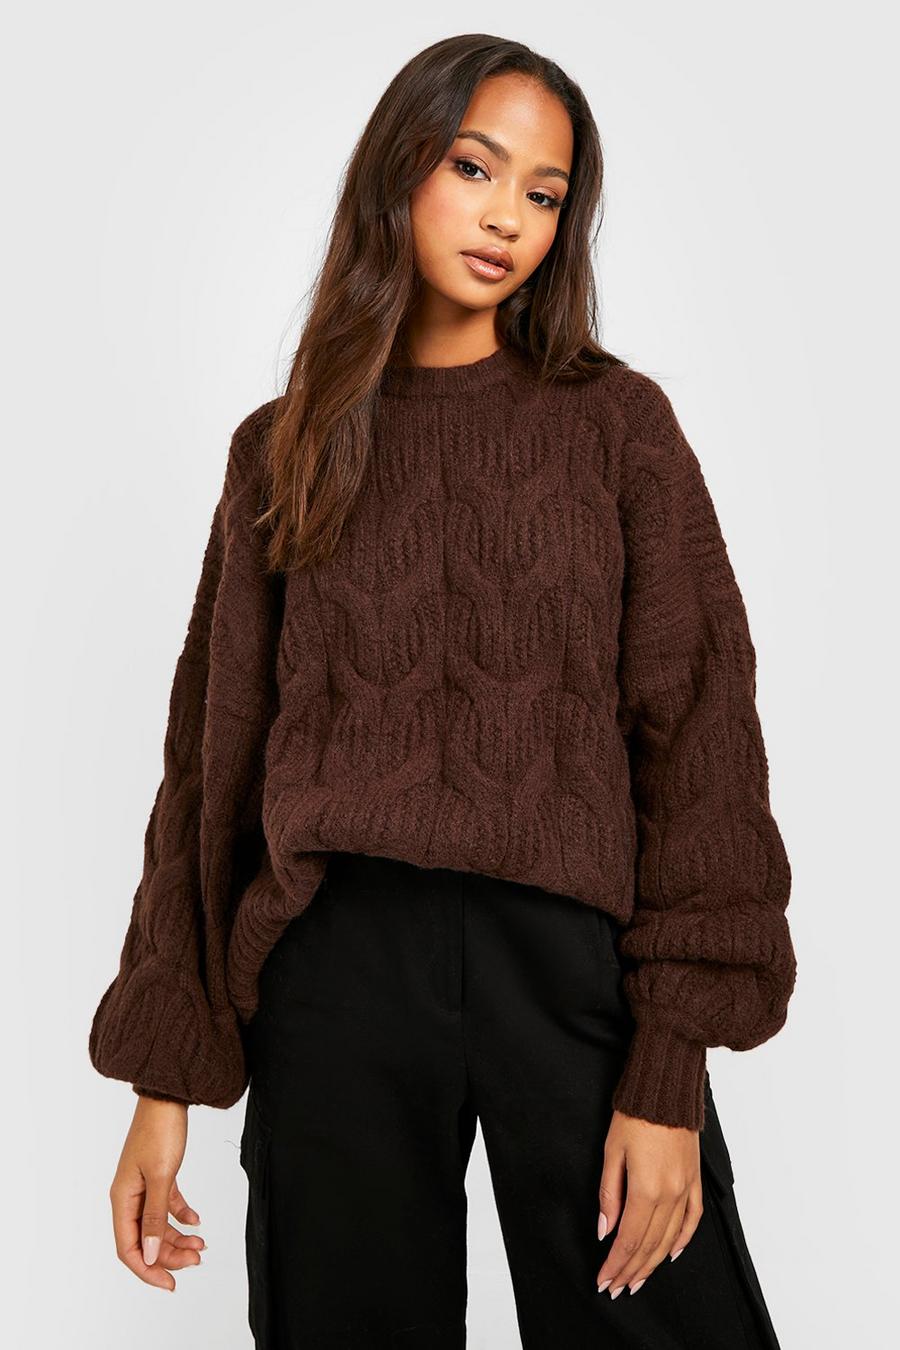 Chocolate brown Fluffy Cable Knit Crew Neck Sweater